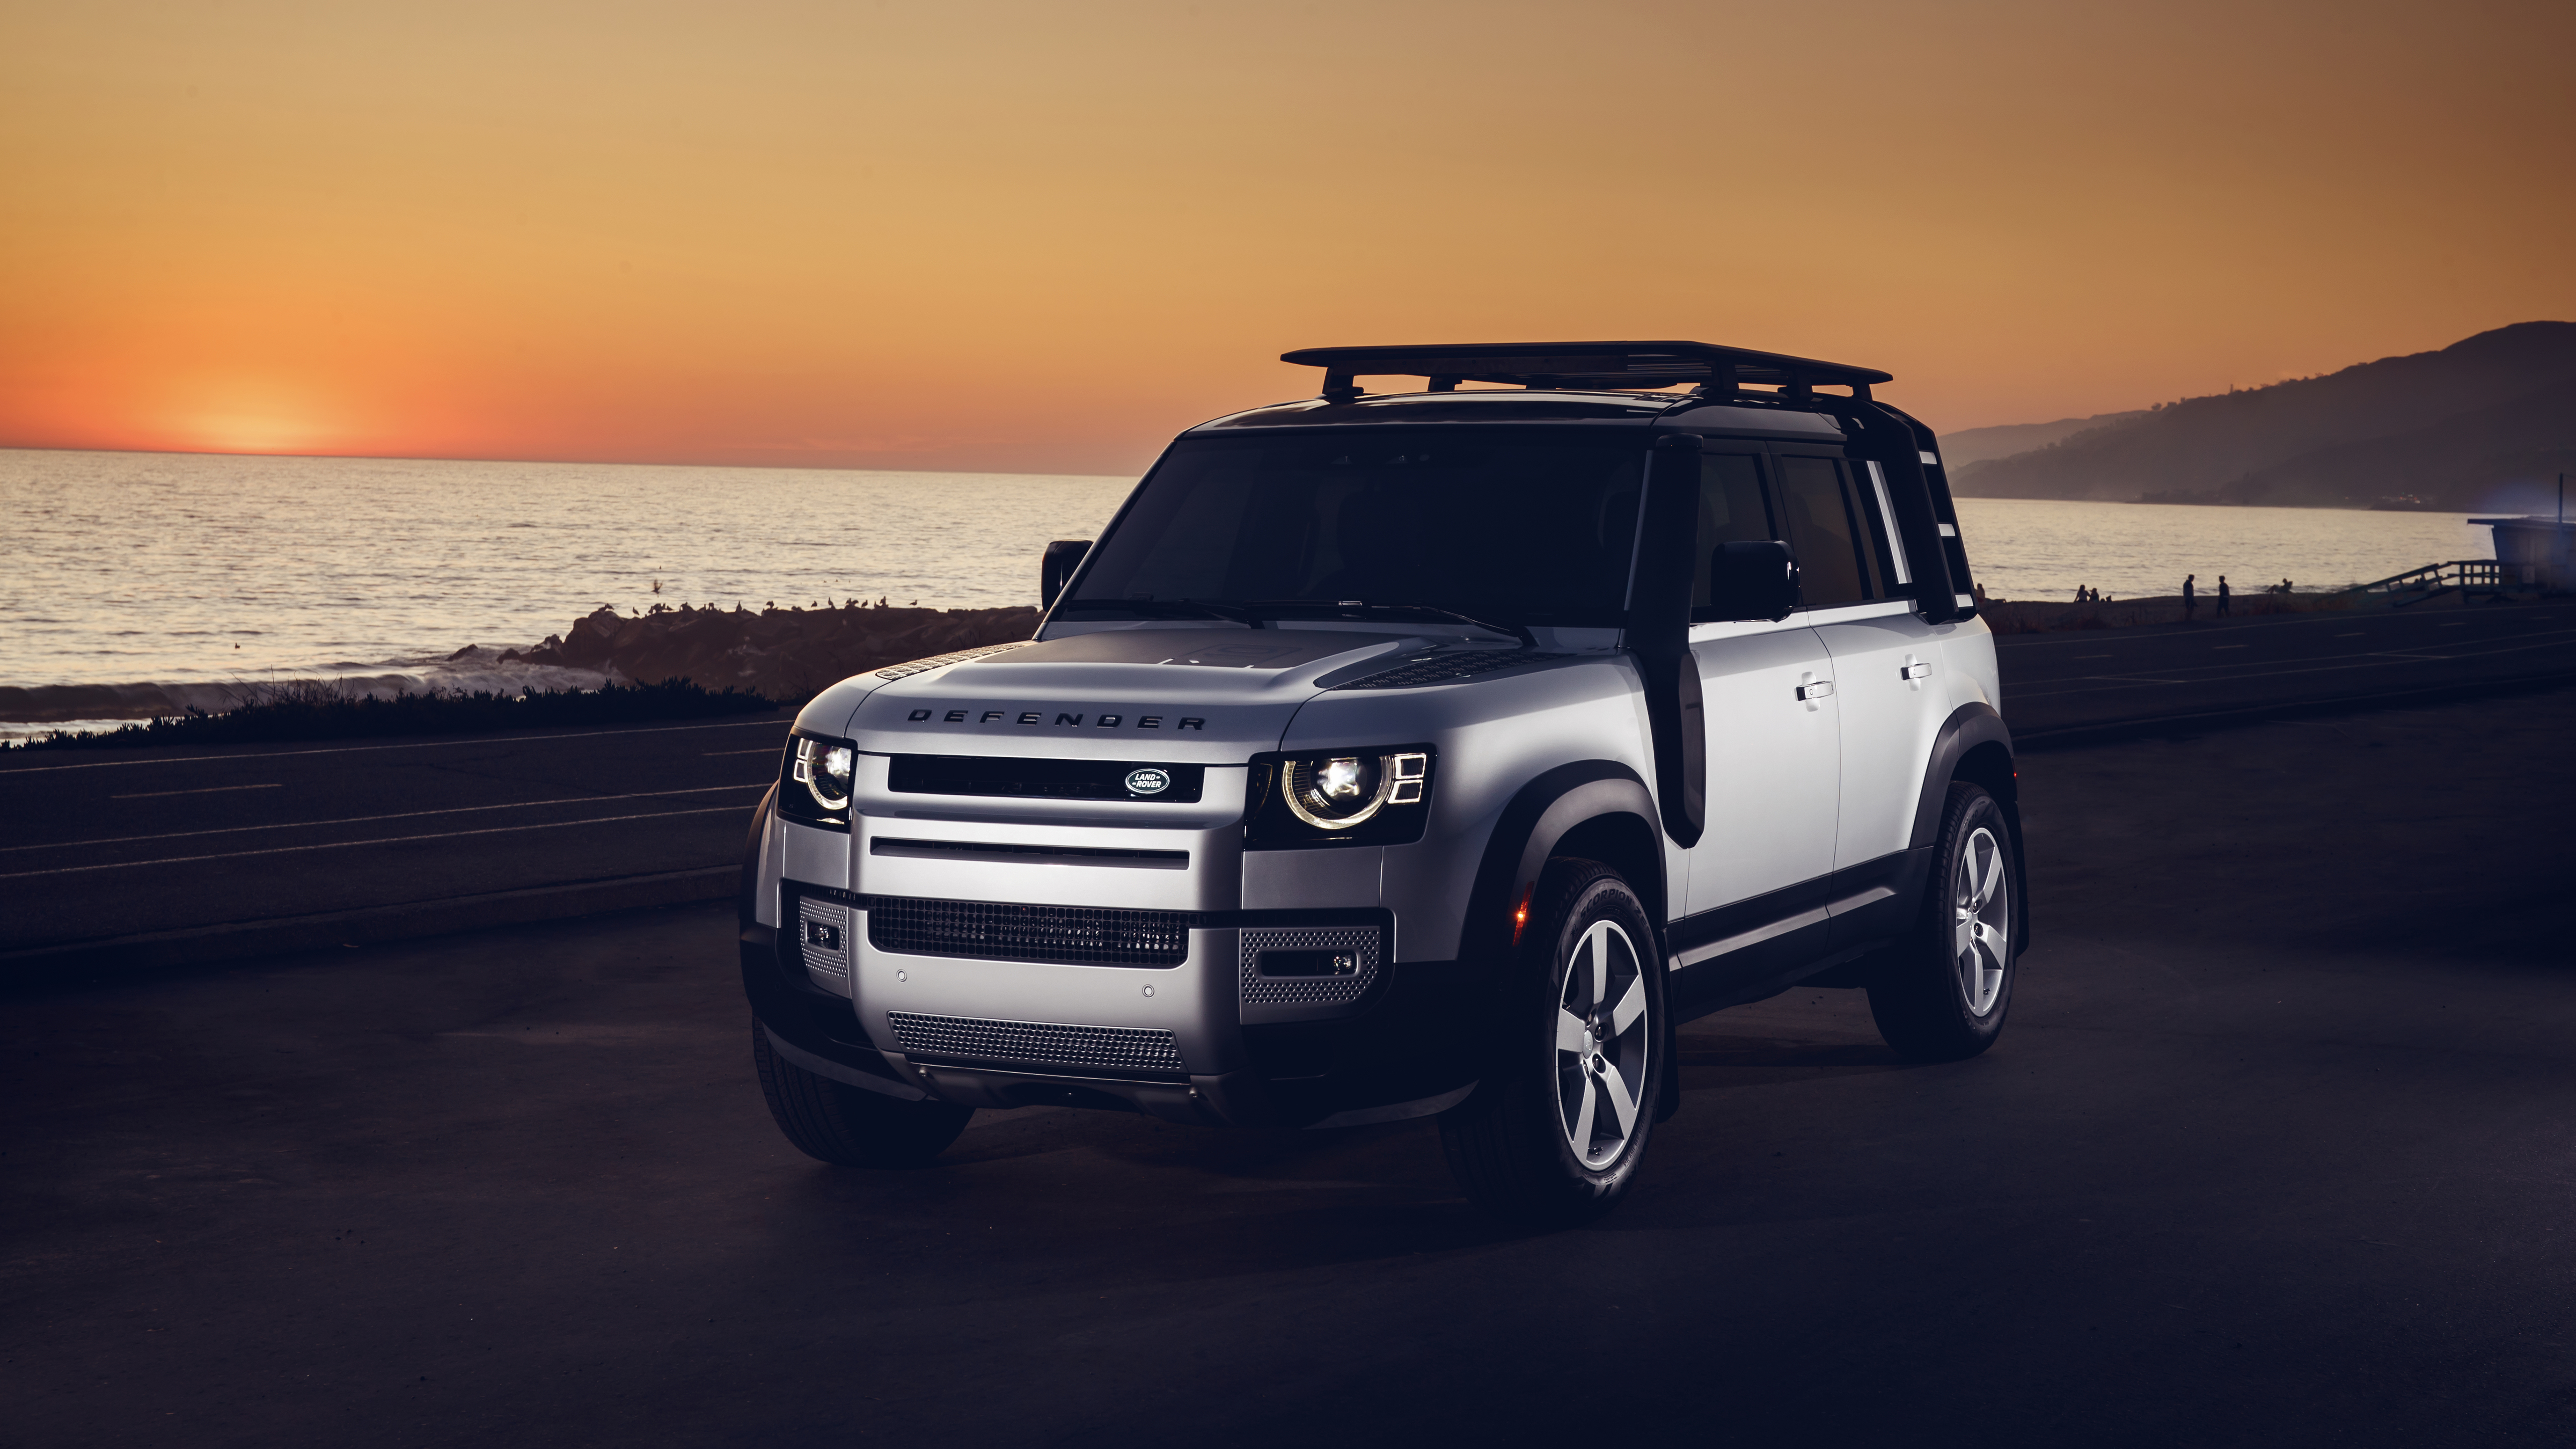 PC Wallpapers  Land Rover